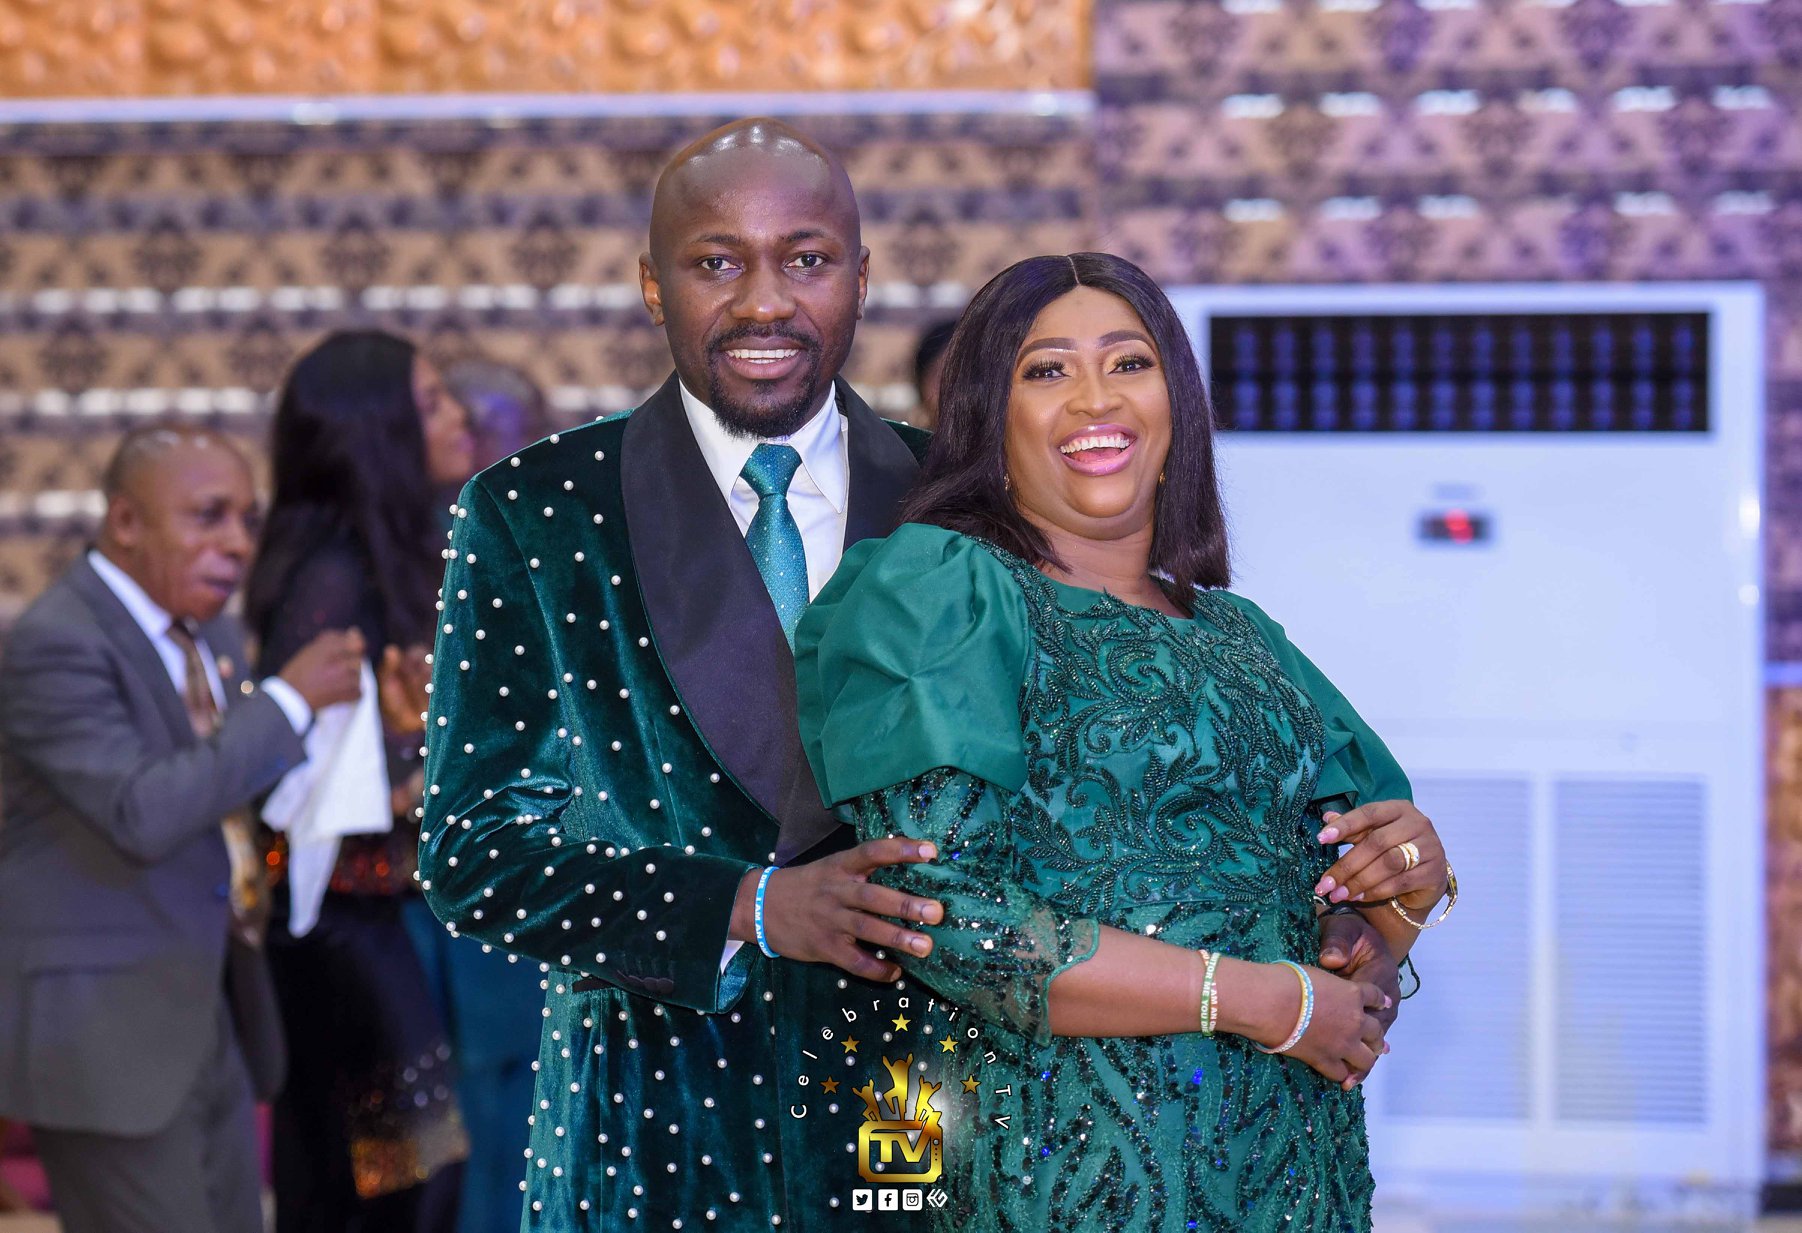 Apostle Suleman and Wife